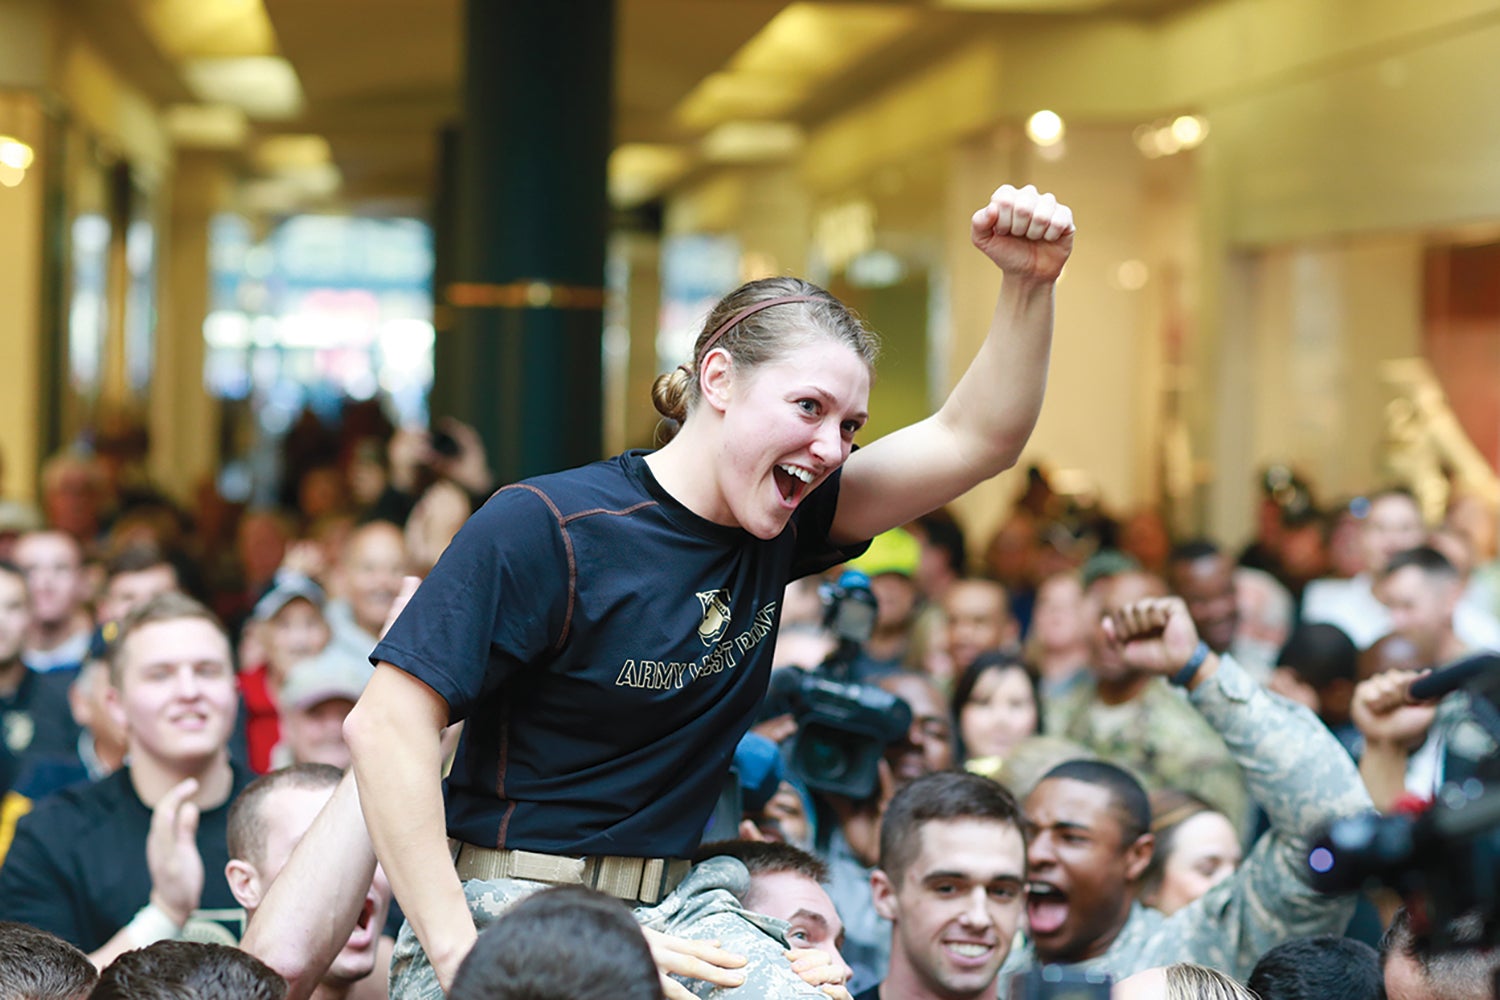 Shaina Coss, the first woman to lead Army Rangers in combat, at a pep rally before the 2015 Army-Navy football game. (Credit: U.S. Army/David Swanson)